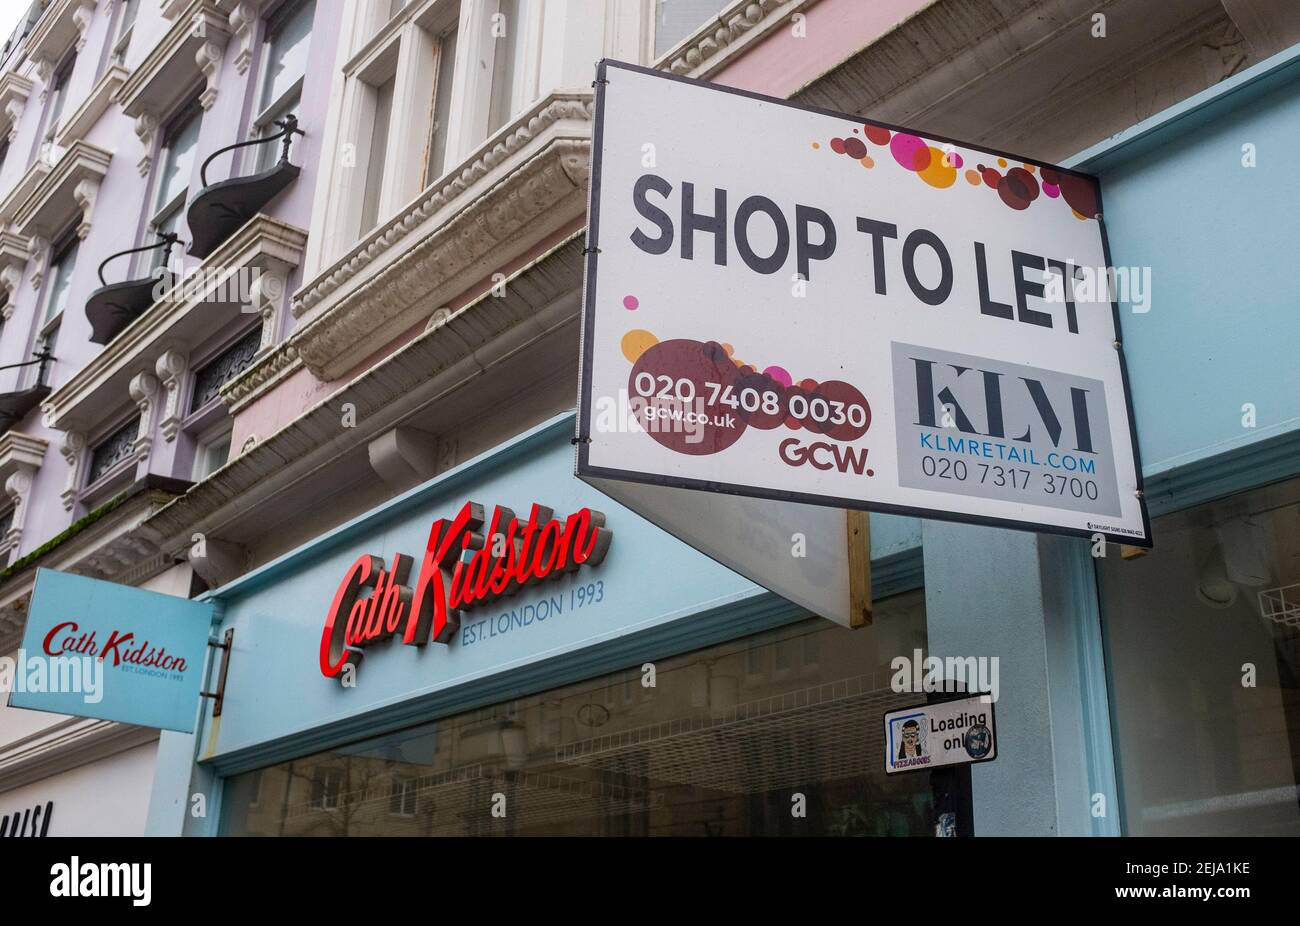 Closed down Cath Kidston shop in North Street Brighton with a Shop to Let sign during lockdown England Stock Photo